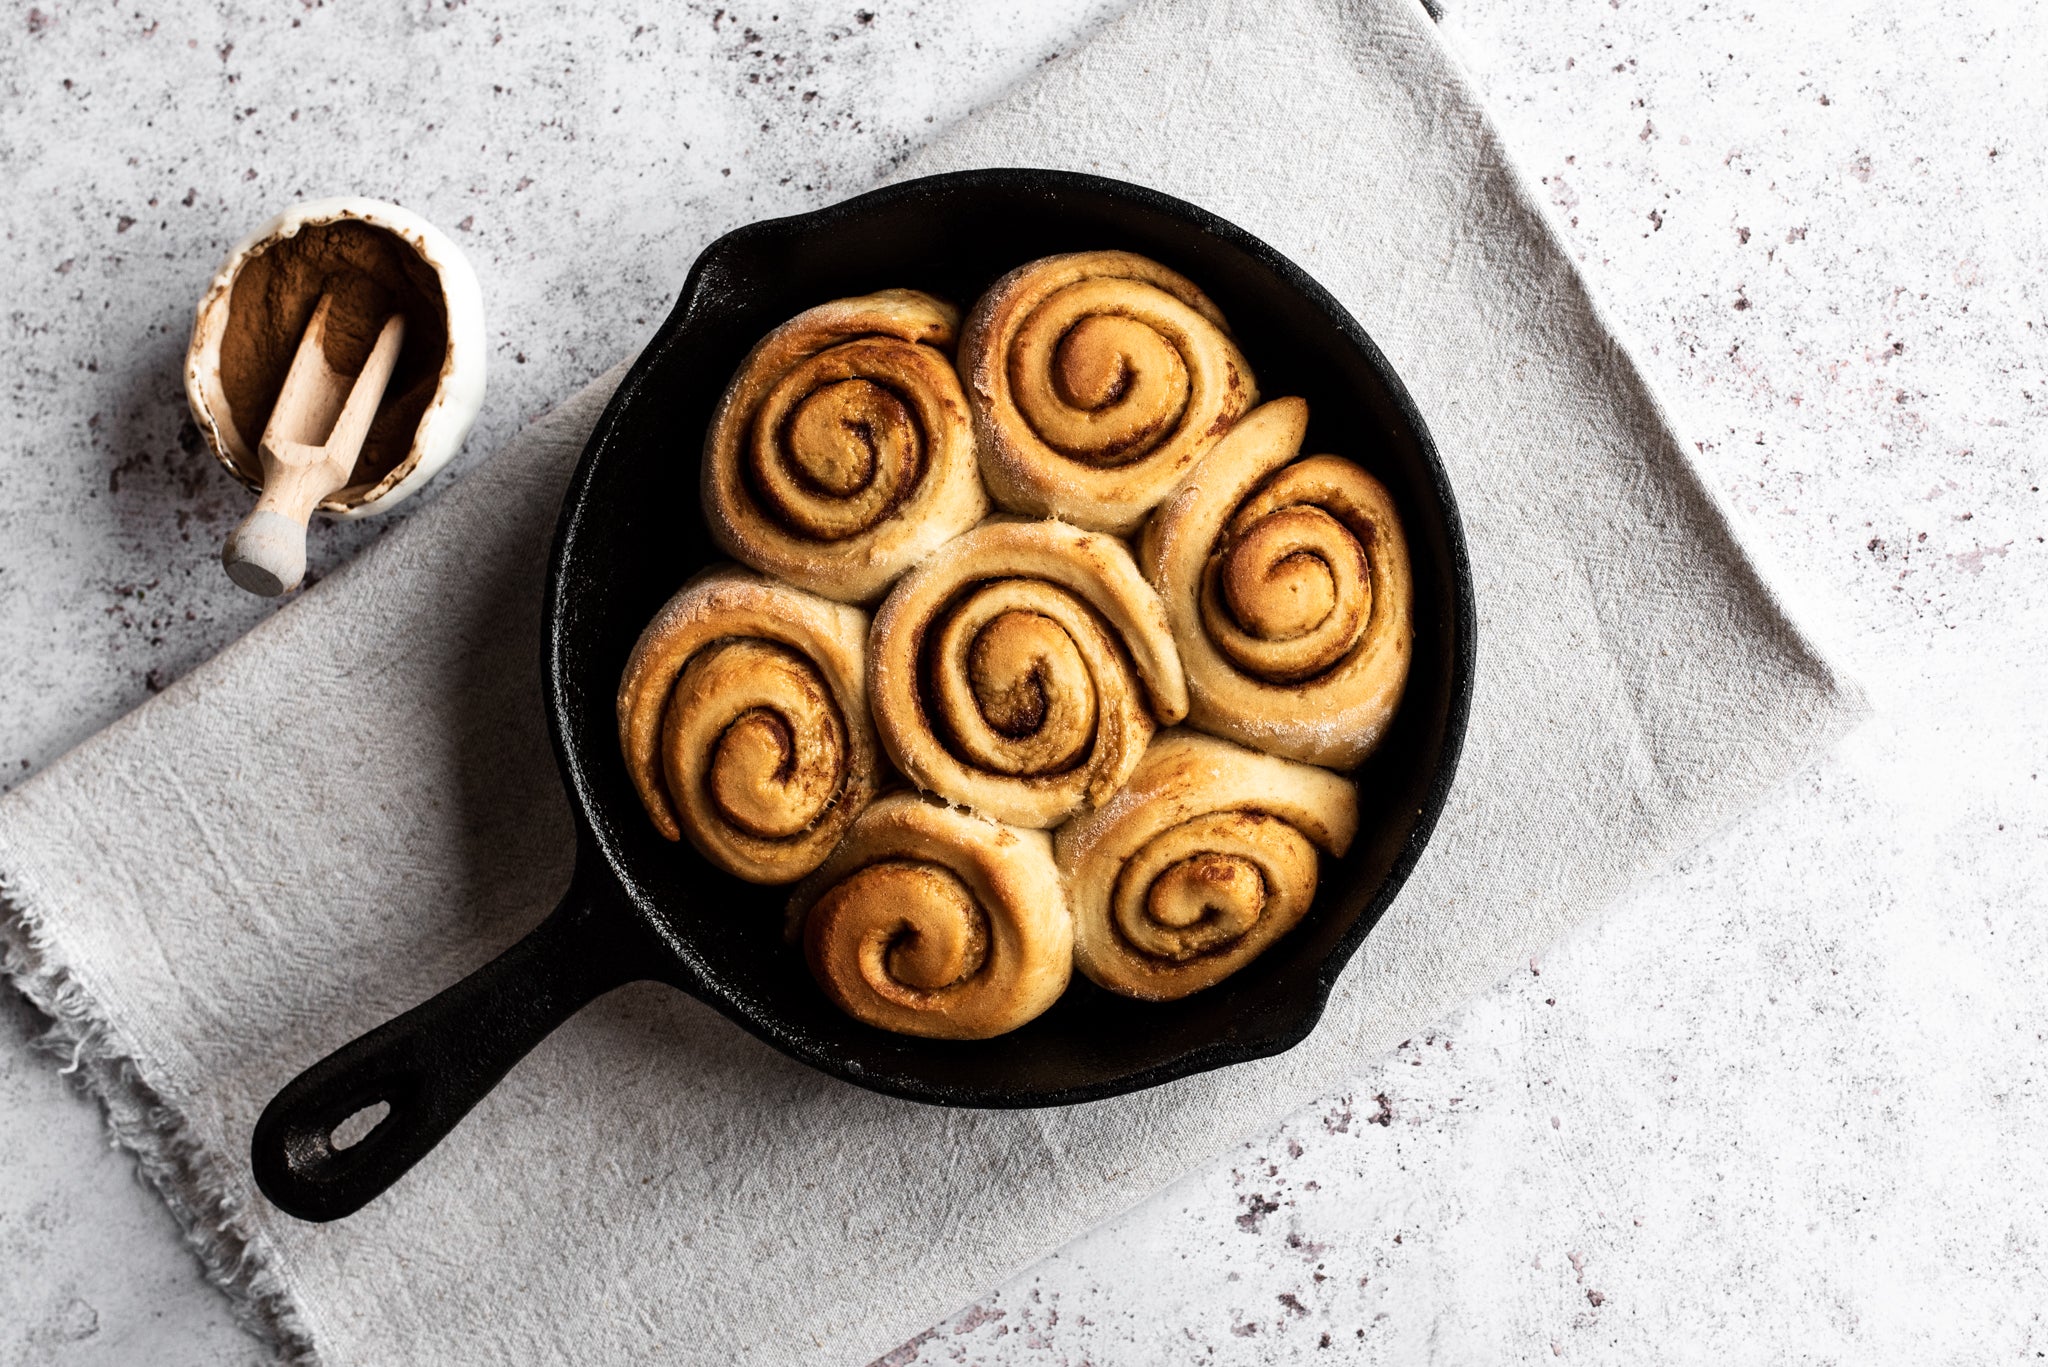 Uniced cinnamon rolls in a skiller with a pot of cinnamon beside it